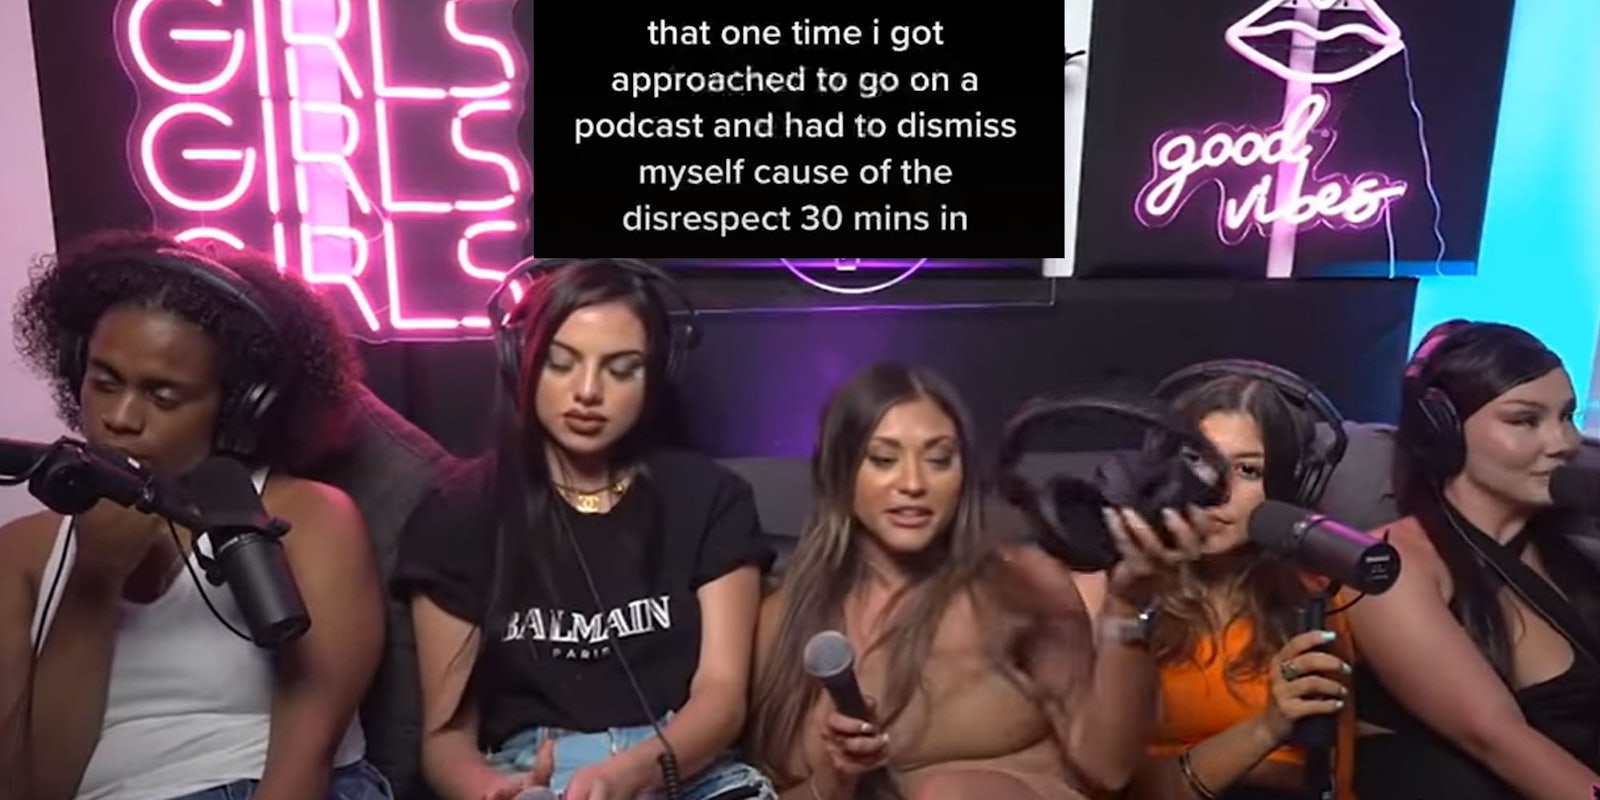 Women seated in podcast one woman taking off headphones leaving caption 'that one time i got approached to go on a podcast and had to dismiss myself cause of the disrespect 30 mins in' centered top